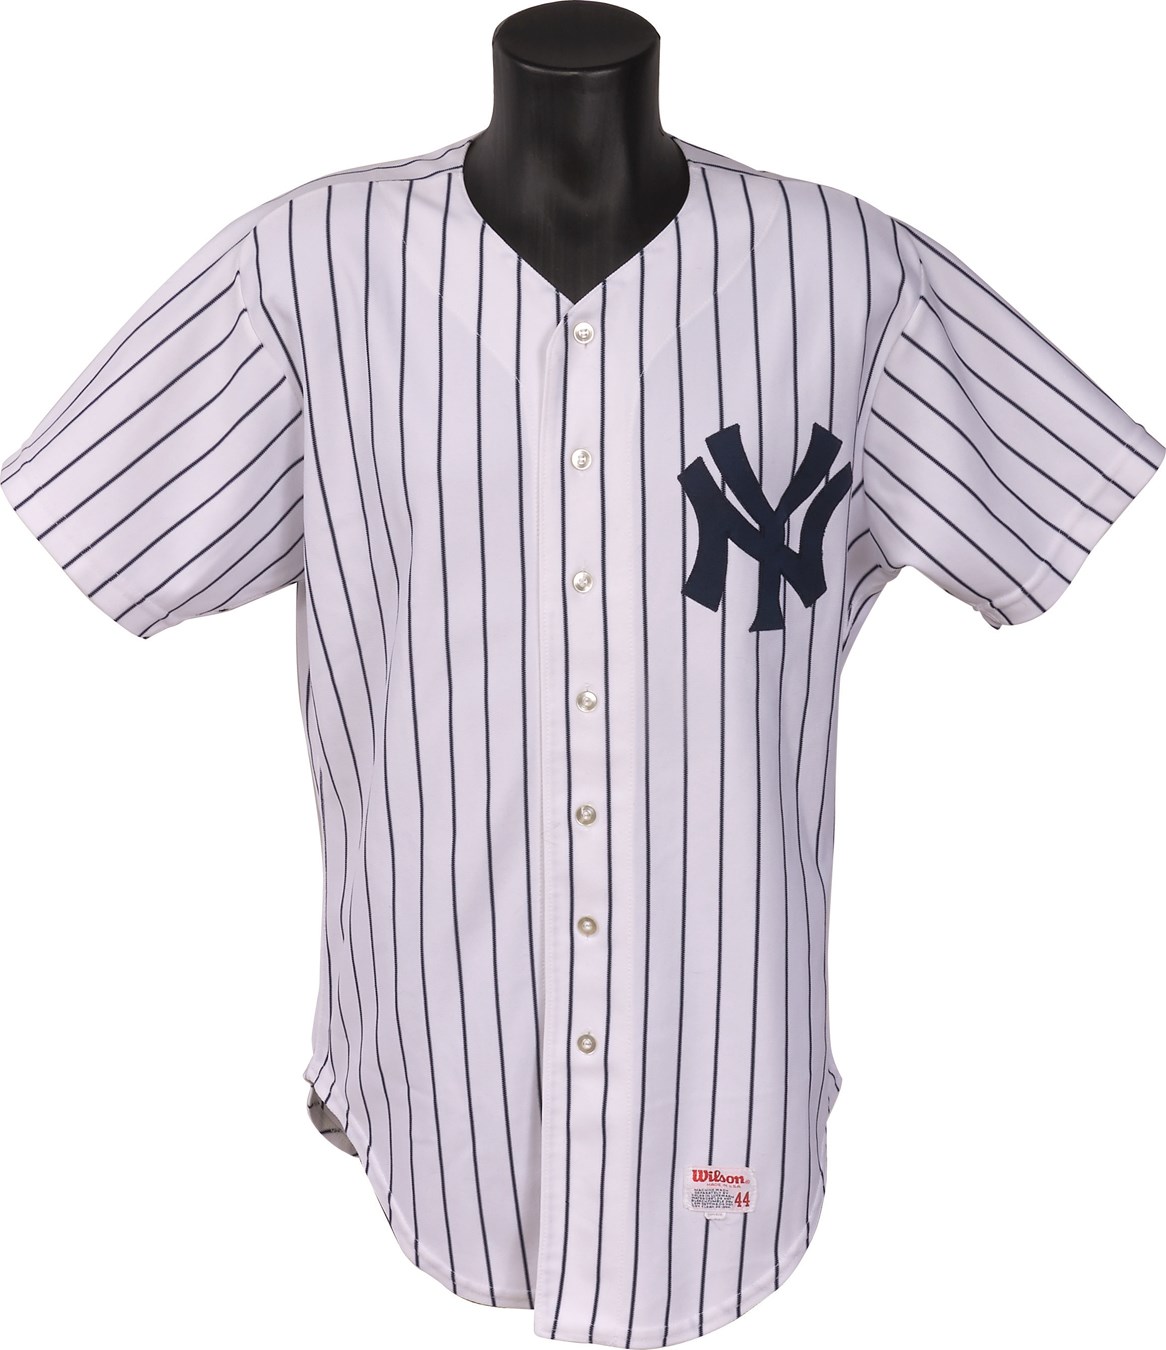 NY Yankees, Giants & Mets - 1984 Phil Niekro New York Yankees Game Worn Jersey (Photomatched)